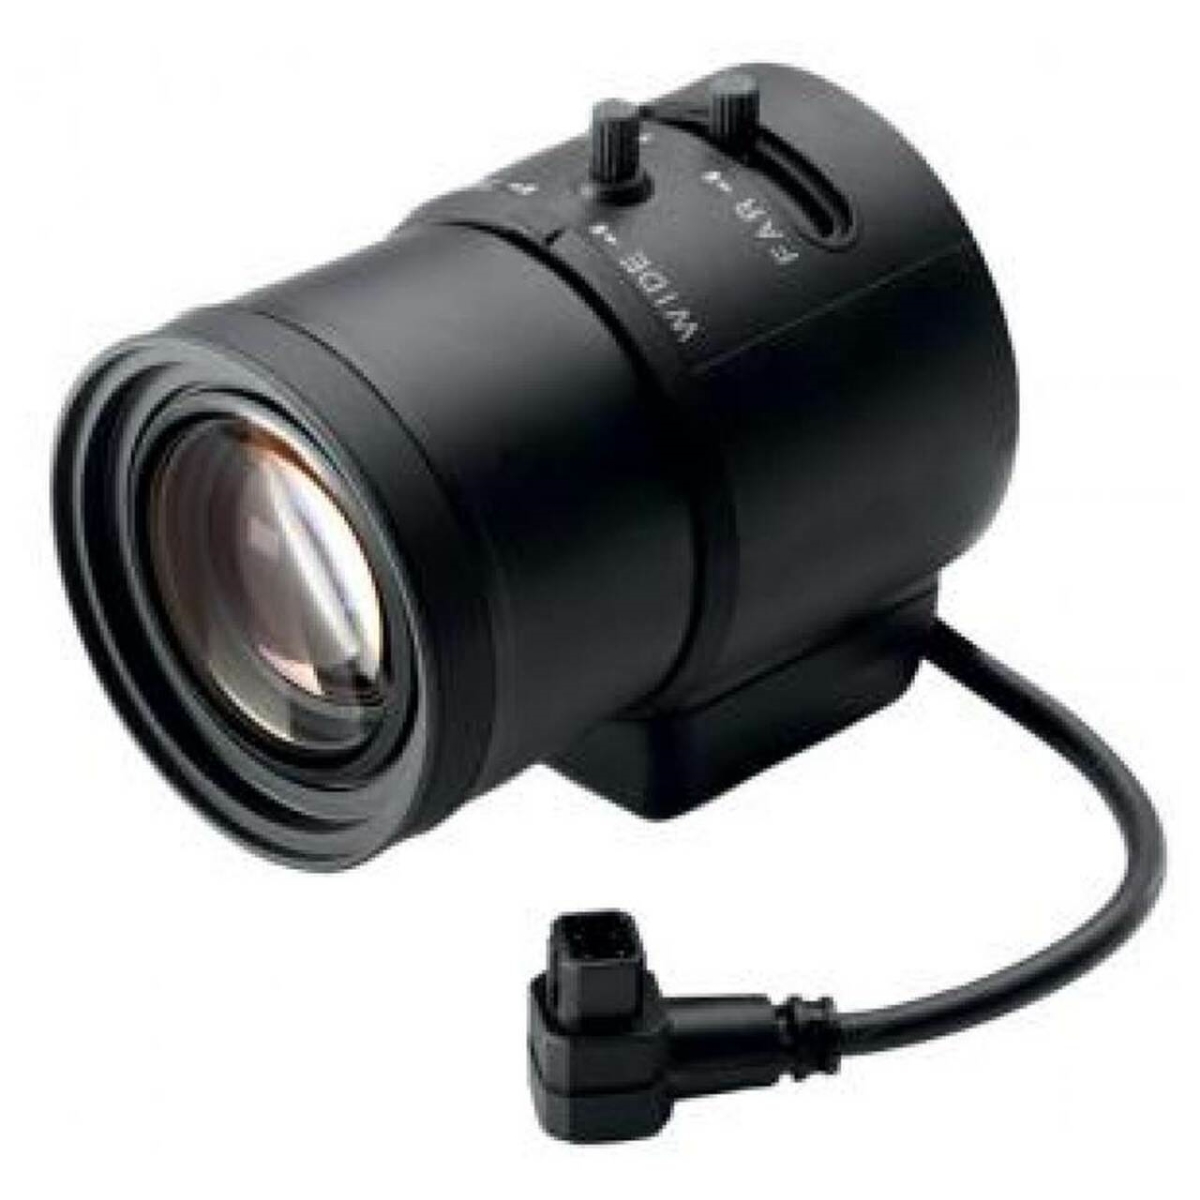 Picture of Bosch LVF-5005C-S1803 5 MP 1-2.5 in. IR-Corrected Varifocal Lens - 1.8 to 3 mm